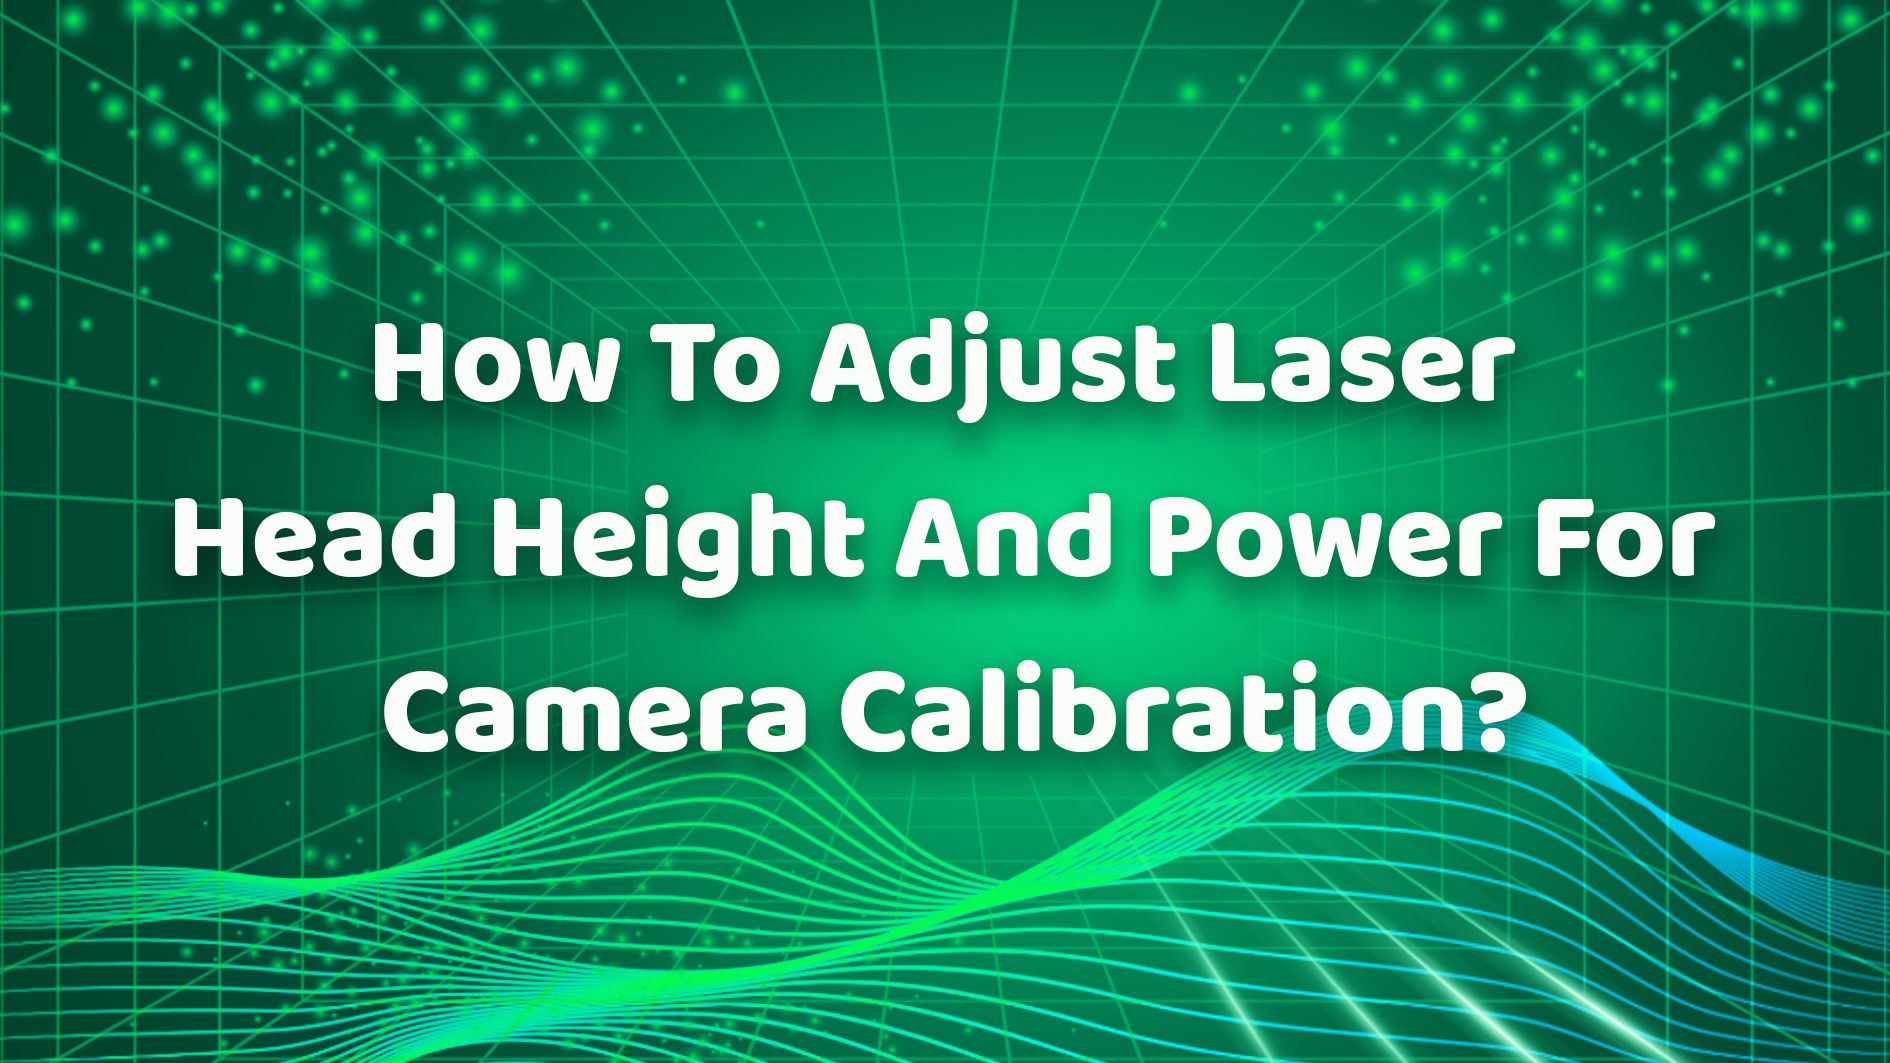 How To Adjust Laser Head Height And Power For Camera Calibration？